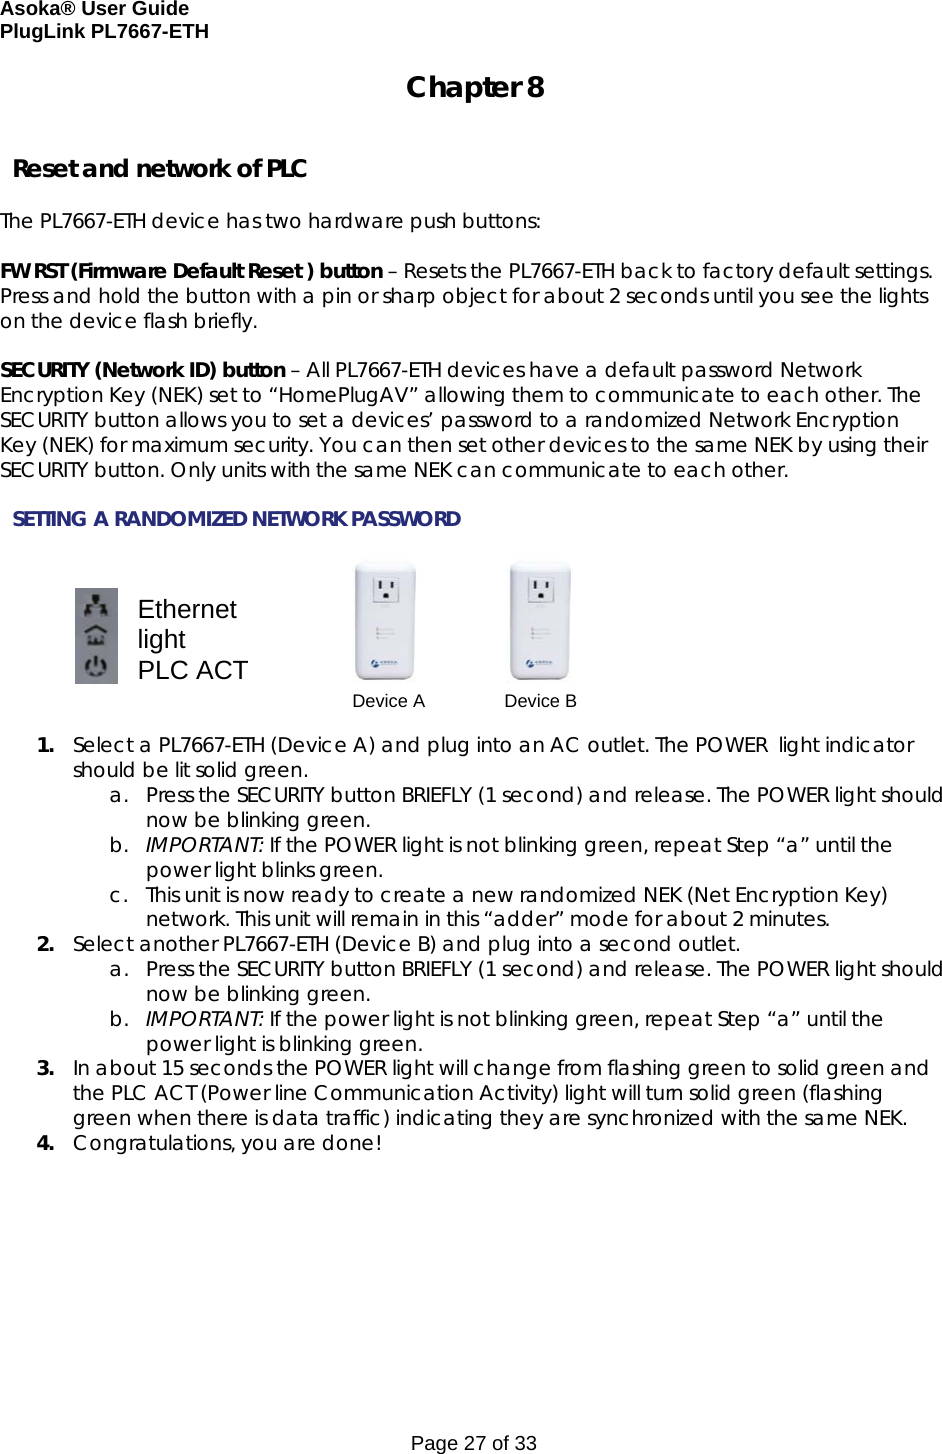 Asoka® User Guide  PlugLink PL7667-ETH Page 27 of 33 Chapter 8   Reset and network of PLC  The PL7667-ETH device has two hardware push buttons:  FW RST (Firmware Default Reset ) button – Resets the PL7667-ETH back to factory default settings. Press and hold the button with a pin or sharp object for about 2 seconds until you see the lights on the device flash briefly.  SECURITY (Network ID) button – All PL7667-ETH devices have a default password Network Encryption Key (NEK) set to “HomePlugAV” allowing them to communicate to each other. The SECURITY button allows you to set a devices’ password to a randomized Network Encryption Key (NEK) for maximum security. You can then set other devices to the same NEK by using their SECURITY button. Only units with the same NEK can communicate to each other.  SETTING A RANDOMIZED NETWORK PASSWORD                                                1. Select a PL7667-ETH (Device A) and plug into an AC outlet. The POWER  light indicator should be lit solid green. a. Press the SECURITY button BRIEFLY (1 second) and release. The POWER light should now be blinking green. b. IMPORTANT: If the POWER light is not blinking green, repeat Step “a” until the power light blinks green.  c. This unit is now ready to create a new randomized NEK (Net Encryption Key) network. This unit will remain in this “adder” mode for about 2 minutes.  2. Select another PL7667-ETH (Device B) and plug into a second outlet.  a. Press the SECURITY button BRIEFLY (1 second) and release. The POWER light should now be blinking green. b. IMPORTANT: If the power light is not blinking green, repeat Step “a” until the power light is blinking green. 3. In about 15 seconds the POWER light will change from flashing green to solid green and the PLC ACT (Power line Communication Activity) light will turn solid green (flashing green when there is data traffic) indicating they are synchronized with the same NEK. 4. Congratulations, you are done!  Ethernet light PLC ACT  Device A  Device B